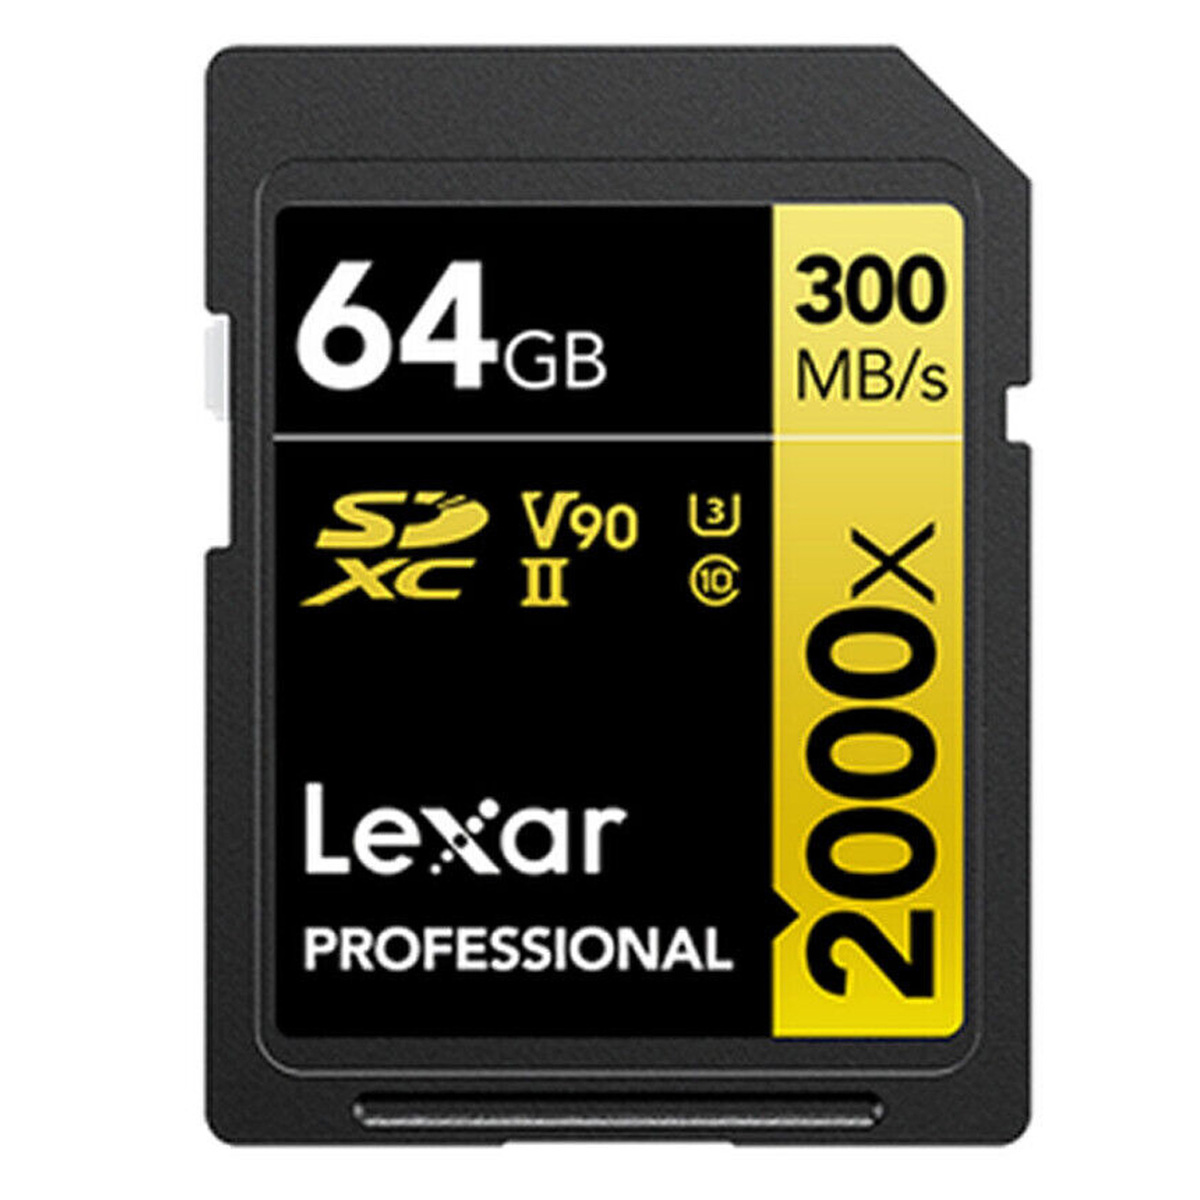 Lexar Professional 64 GB 2000X Sdhc/Sdxc Uhs-Ii Memory Card with 300Mbps Transfer Speed, LSD2000064G-BNNNG